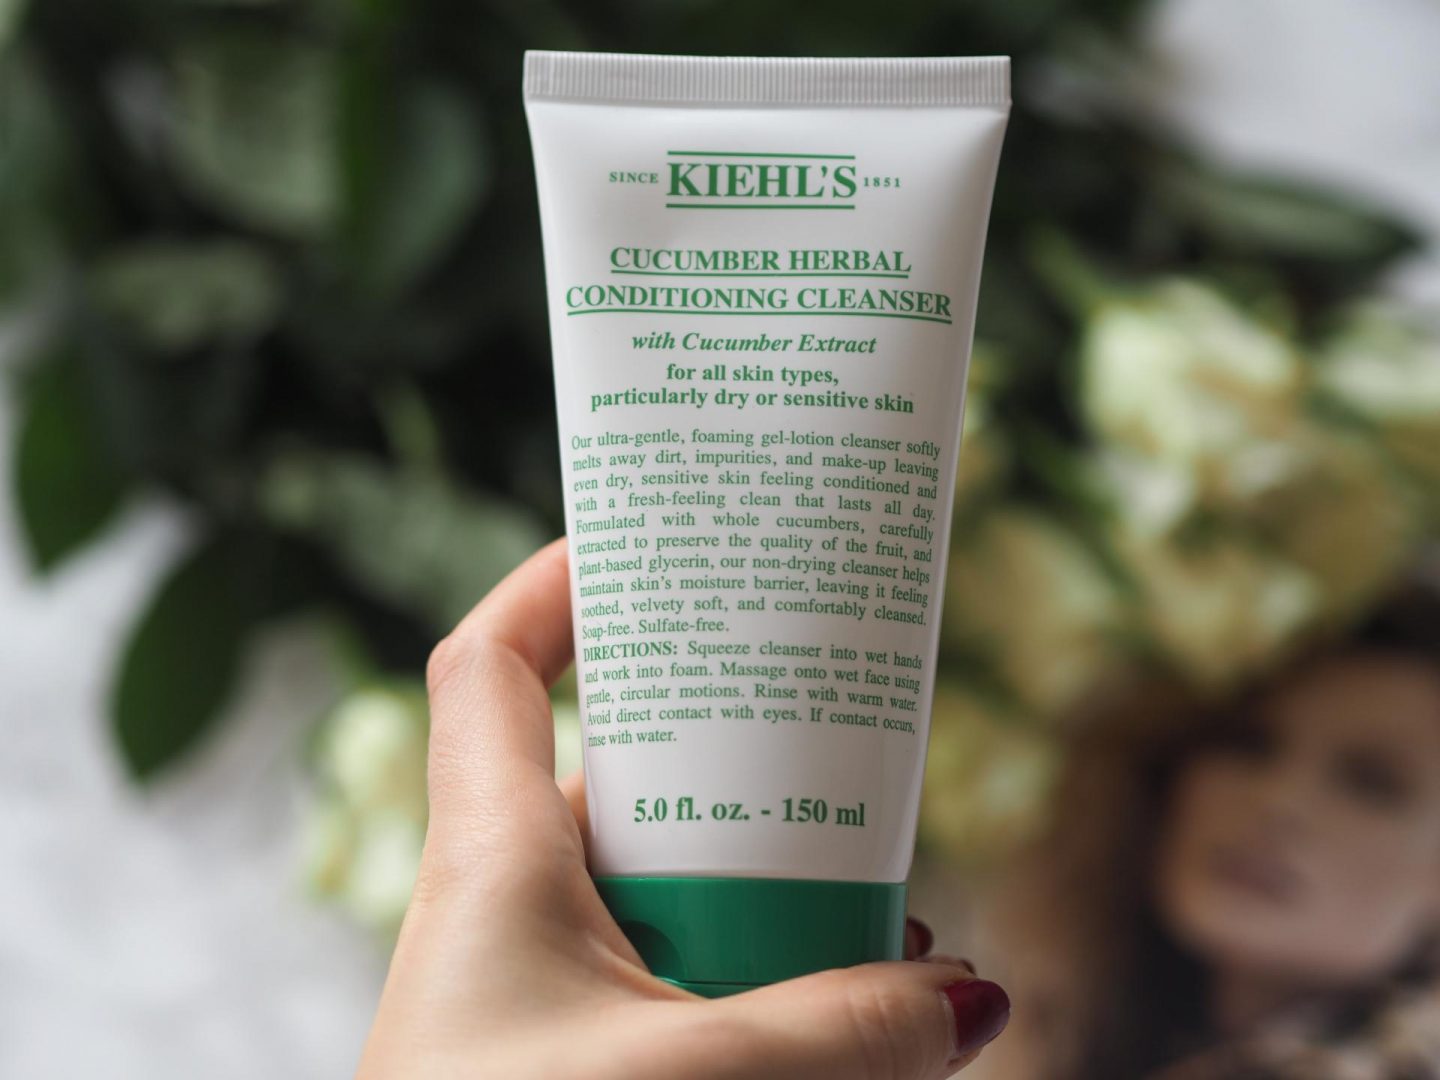 November Beauty Favourites - Product: Kiehl’s Cucumber Herbal Conditioning Cleanser